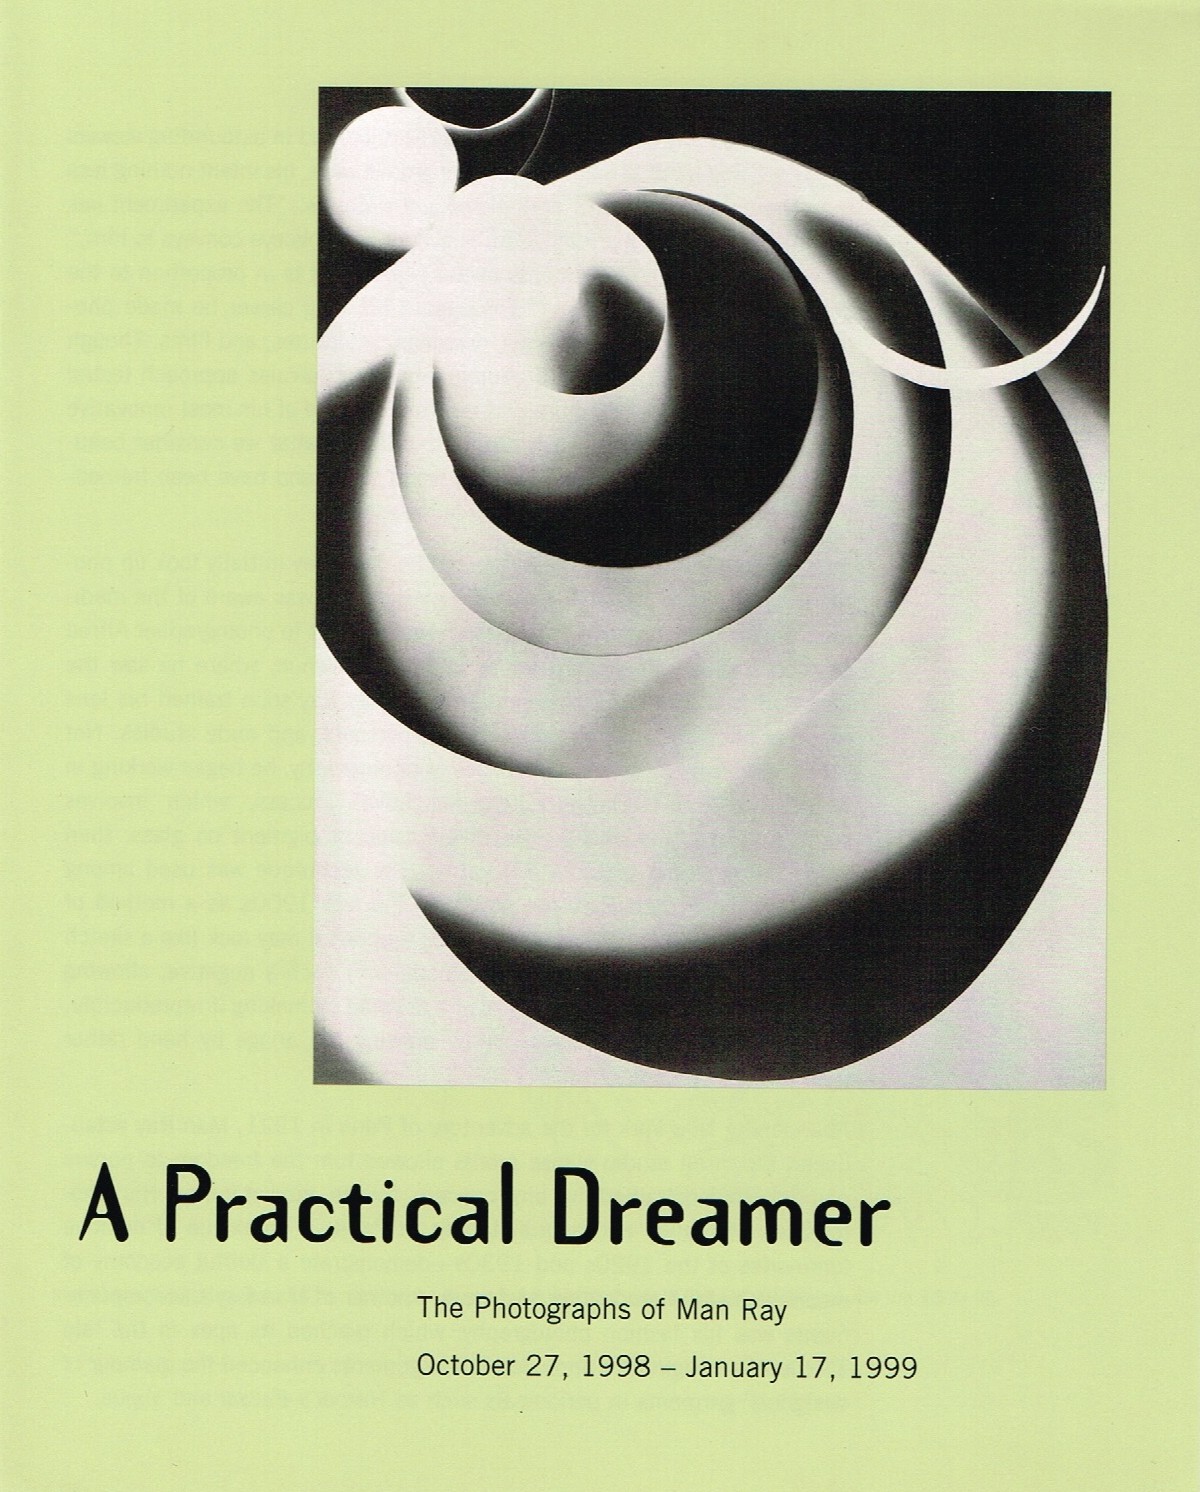 (MAN RAY). Ware, Katherine - A PRACTICAL DREAMER: THE PHOTOGRAPHS OF MAN RAY